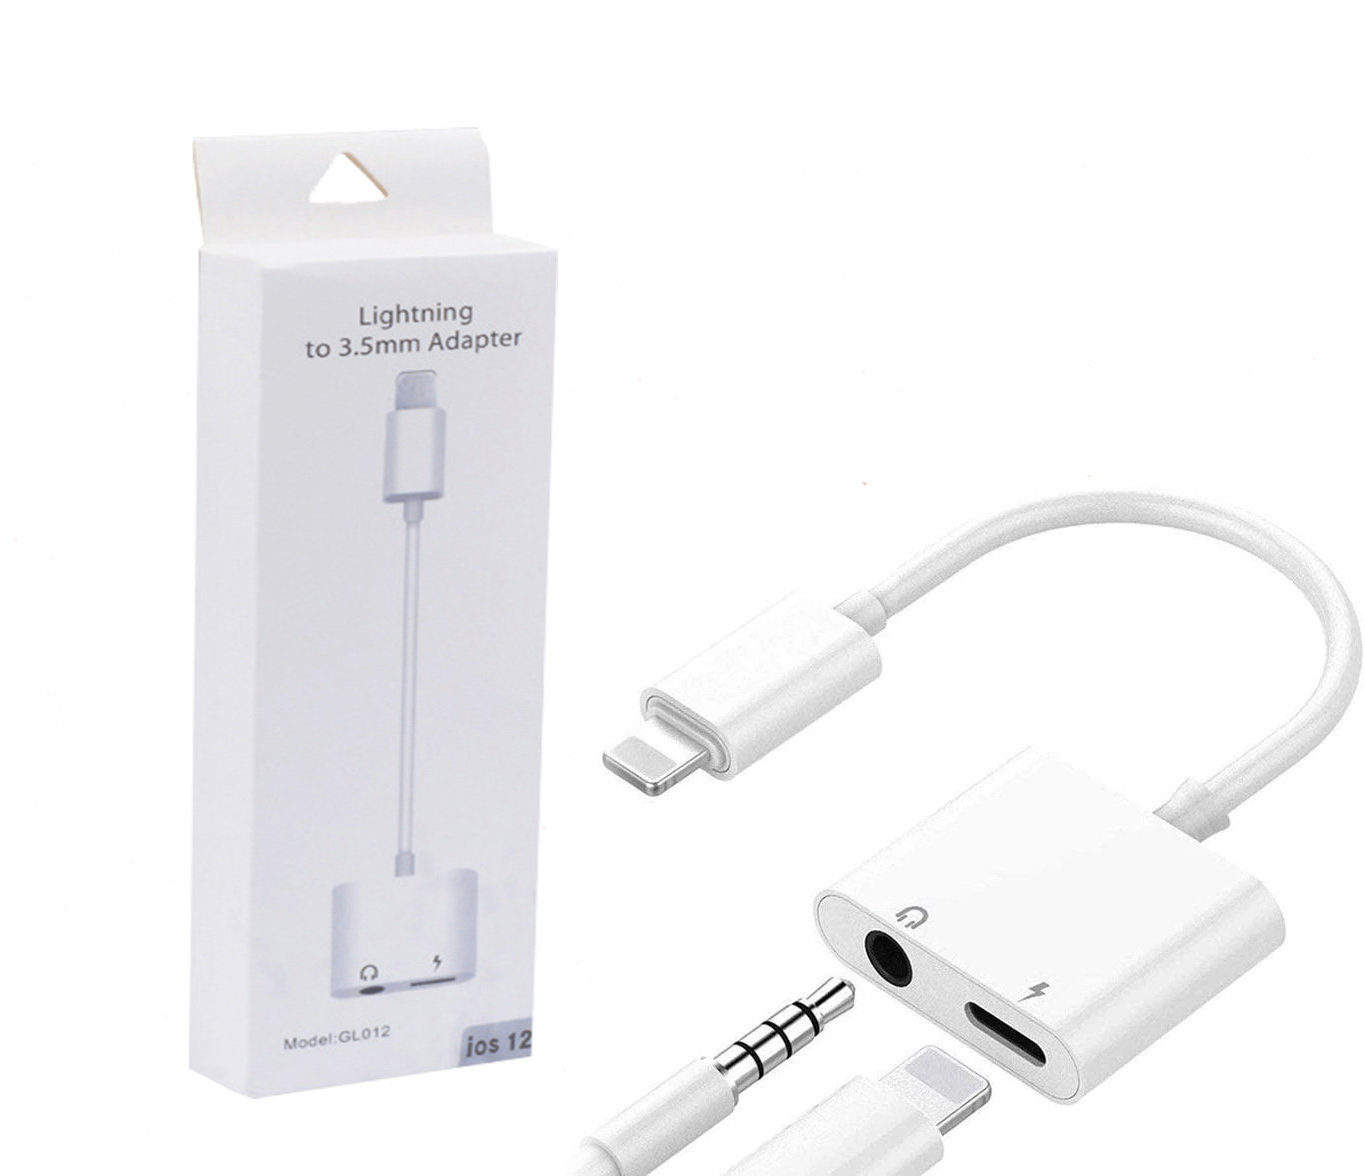 

2 in 1 Adapter AUX Charging Lightning to 3.5mm Cable Splitter For XS MAX XR X 7 8 Plus Splitte